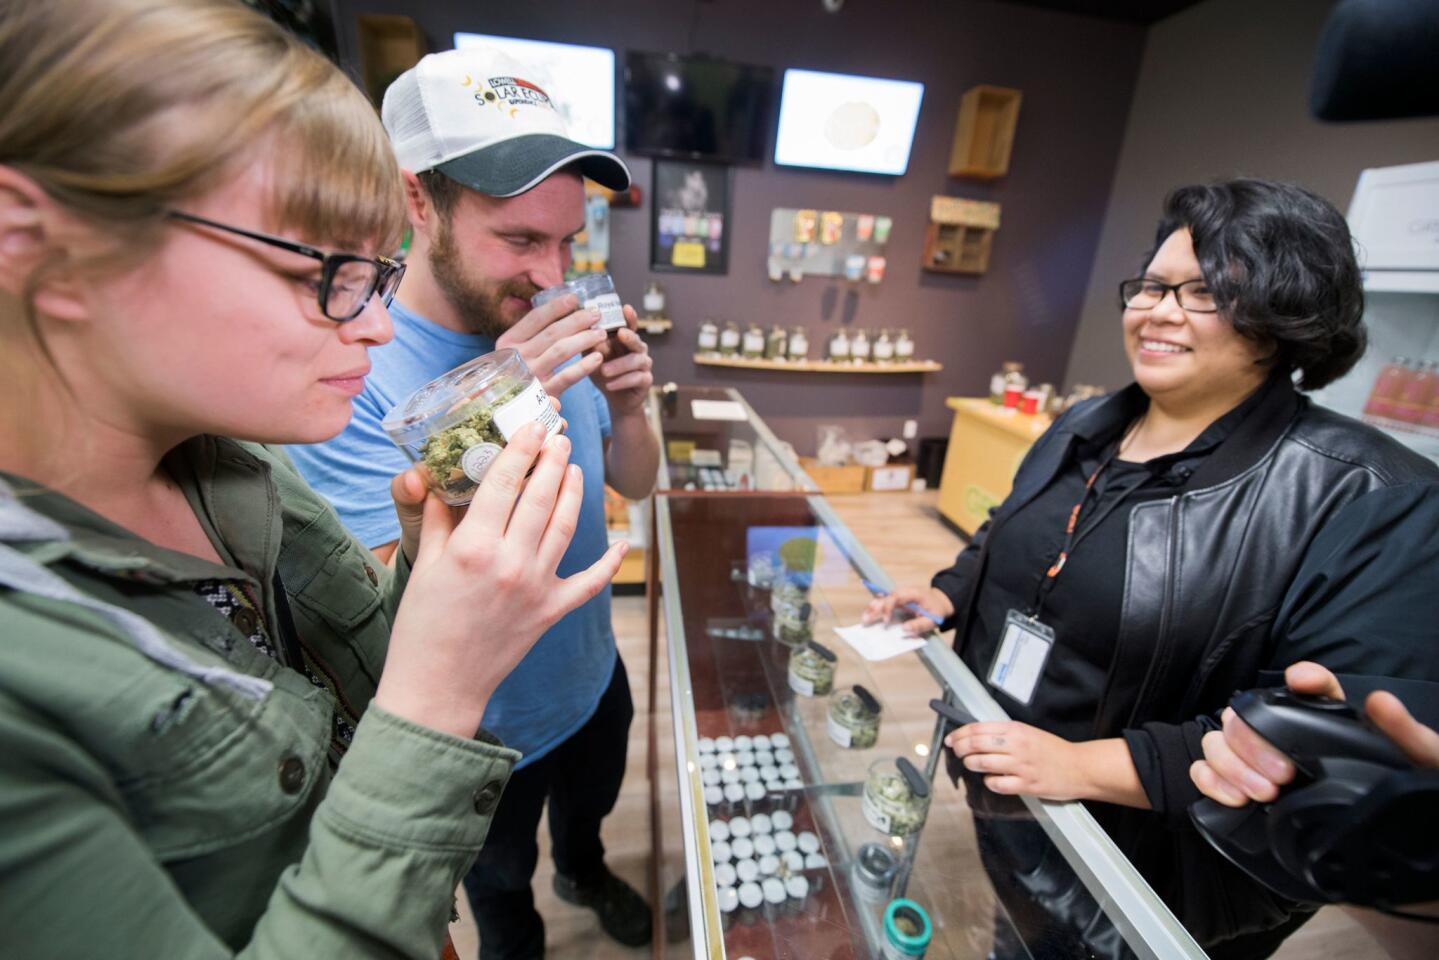 Tourists Laura Torgerson and Ryan Sheehan, visiting from Arizona, smell cannabis buds at the Green Pearl Organics dispensary on the first day of legal recreational marijuana sales in California, January 1, 2018 in Desert Hot Springs, California.